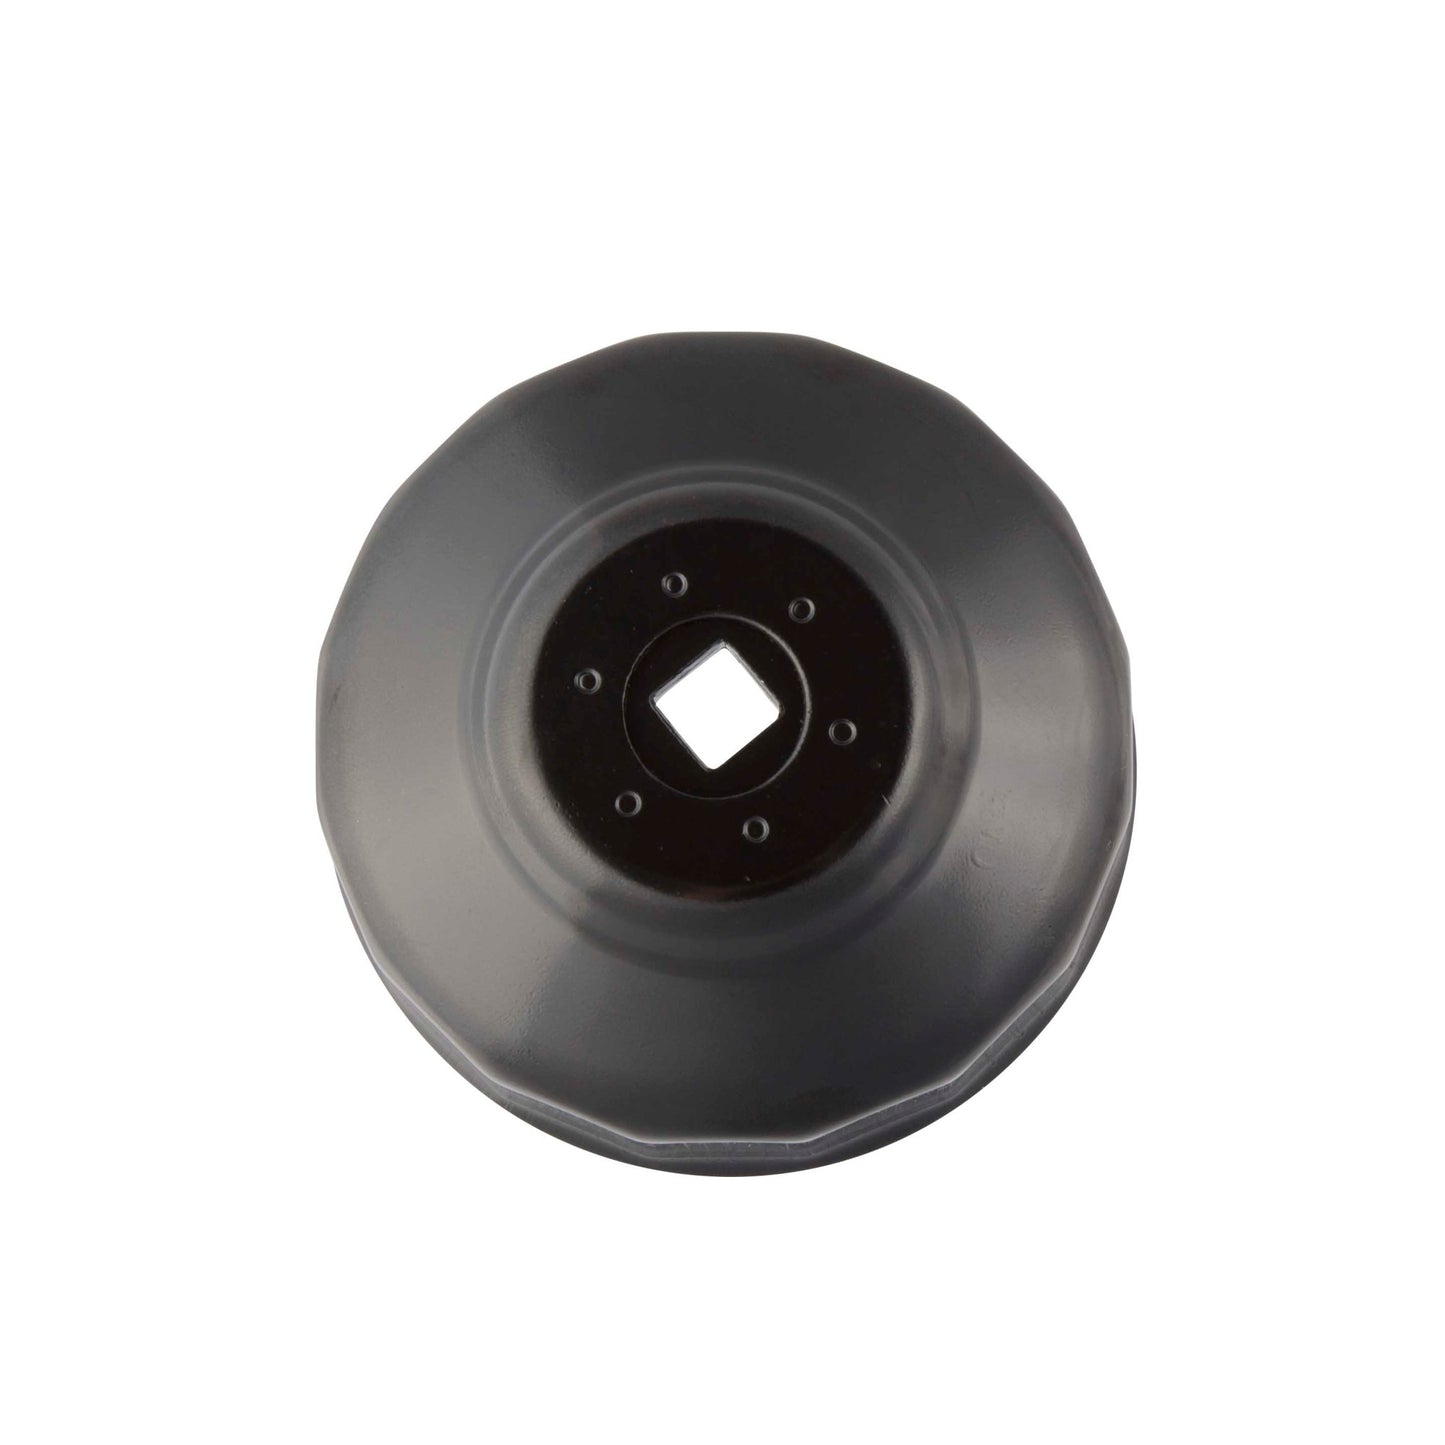 Oil Filter Cap Wrench 86mm x 16 Flute